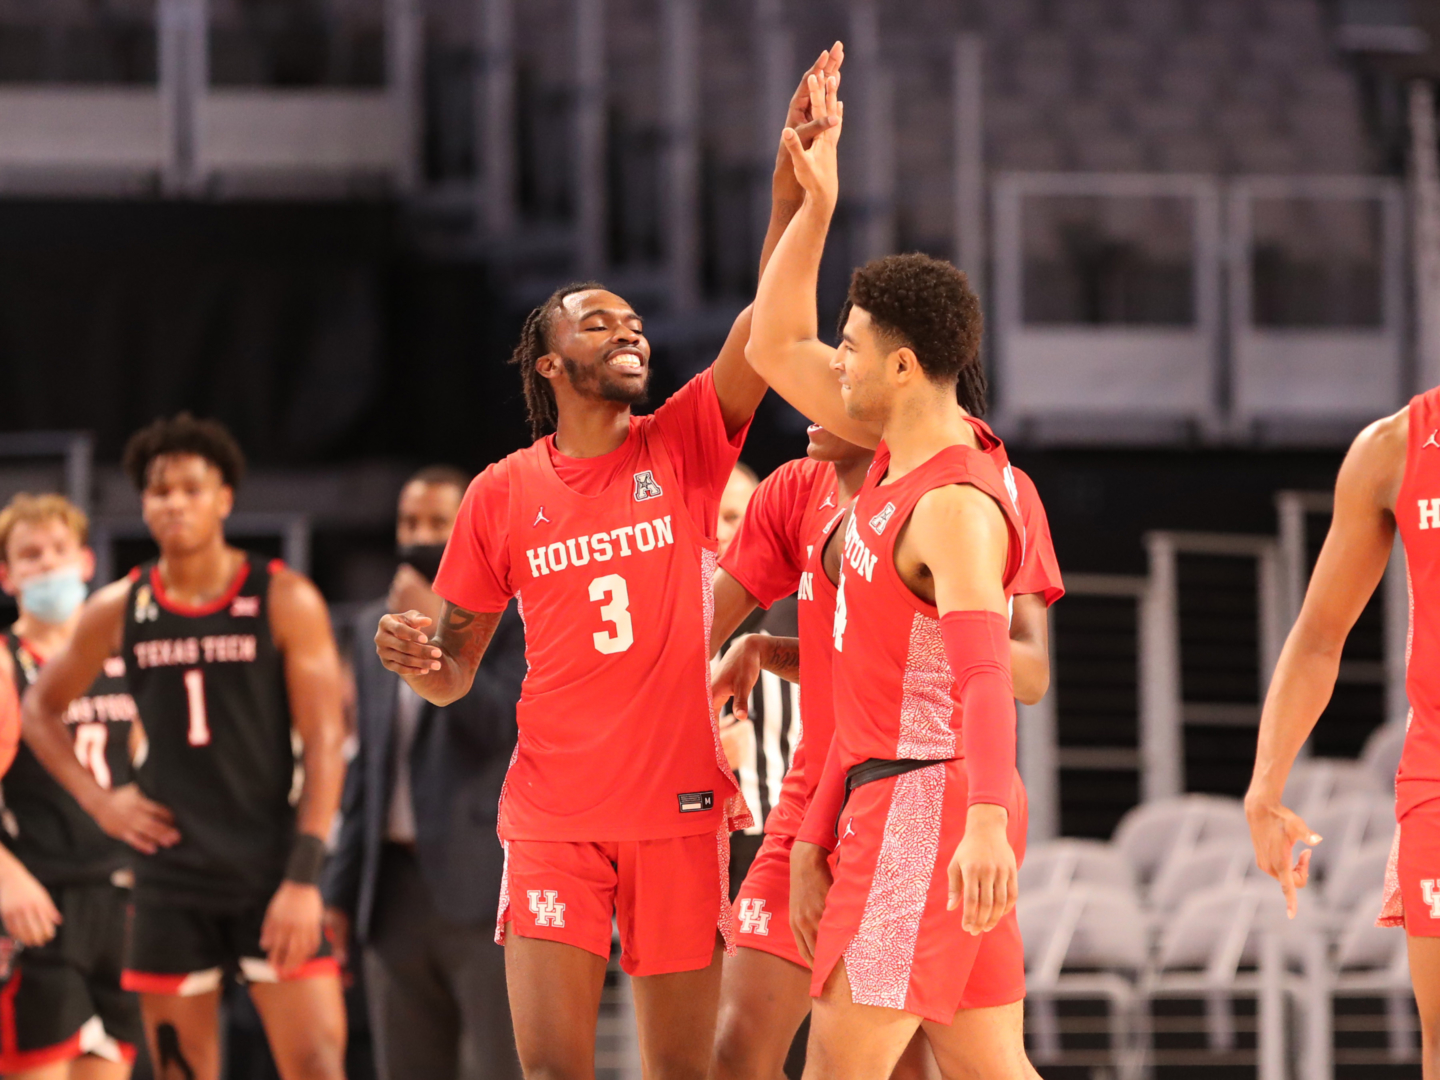 UH guards DeJon Jarreau (3) and Quentin Grimes celebrate with a high five during a break in its game against No. 14 Texas Tech at Dickies Arena in Fort Worth. | Courtesy of UH athletics